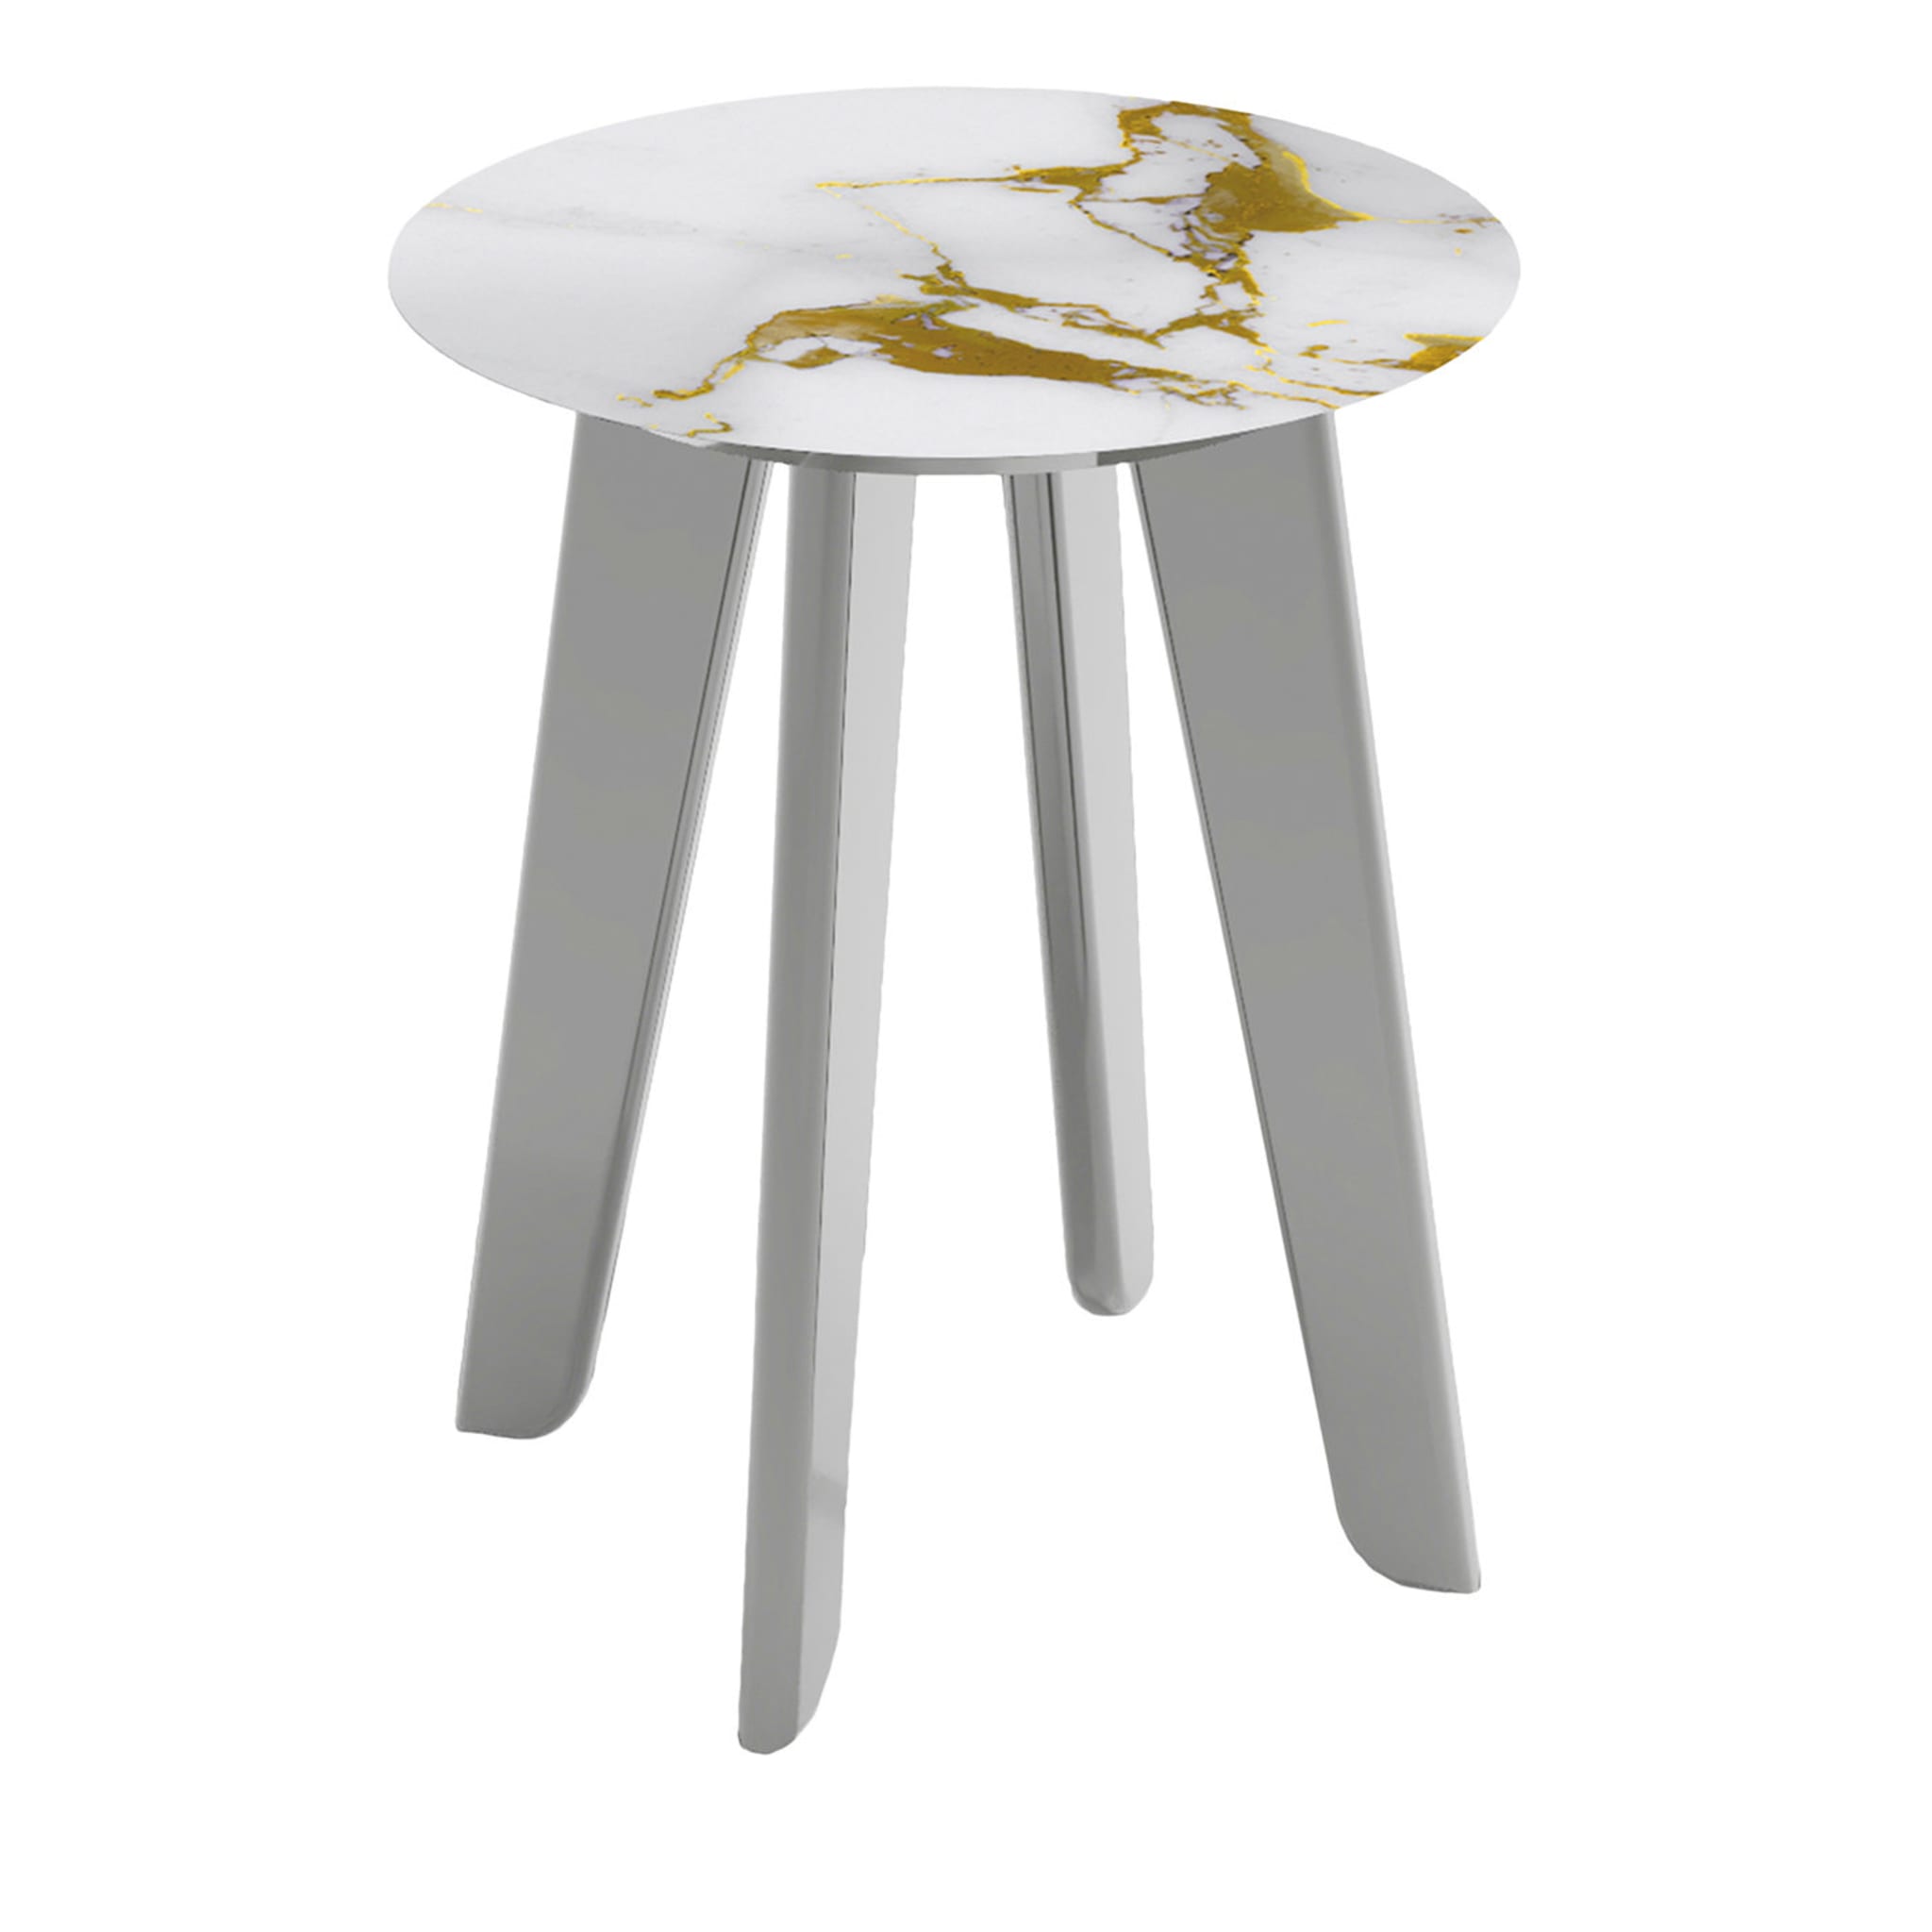 Owen Tall Round Side Table with White and Gold Top (Table d'appoint ronde haute avec plateau blanc et or) - Vue principale